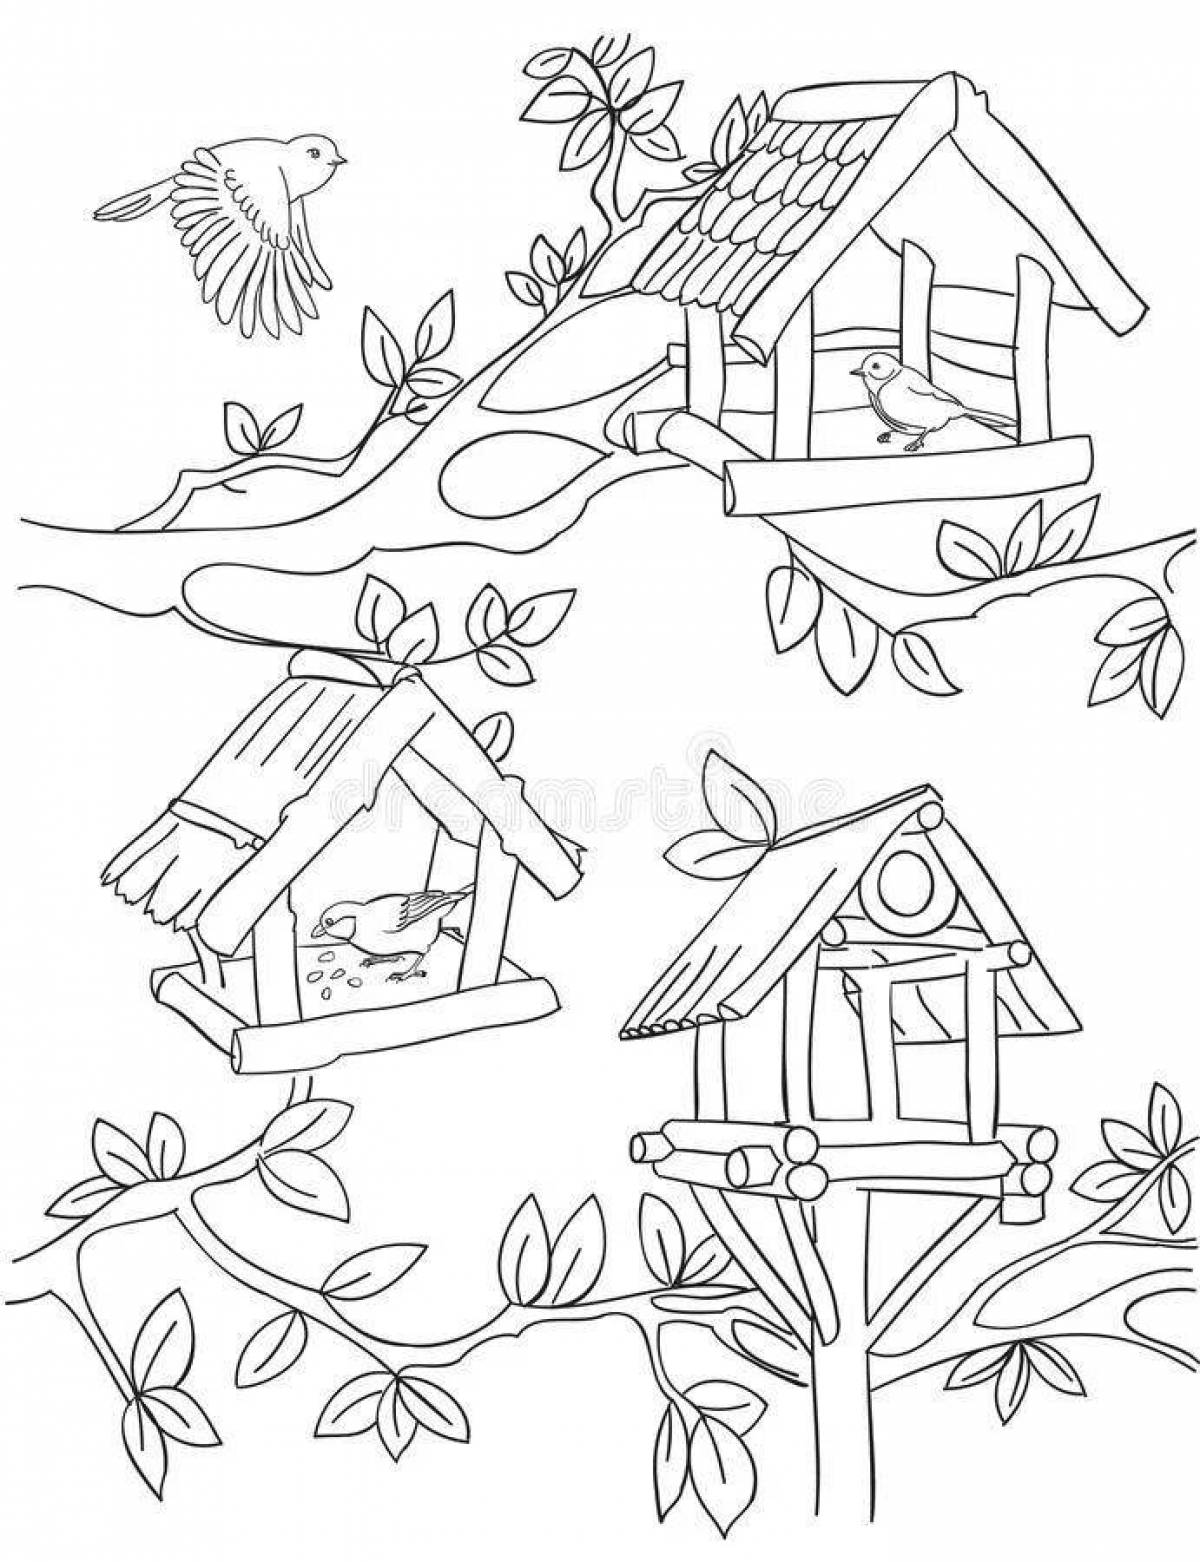 Radiant coloring page birds at the feeder in winter